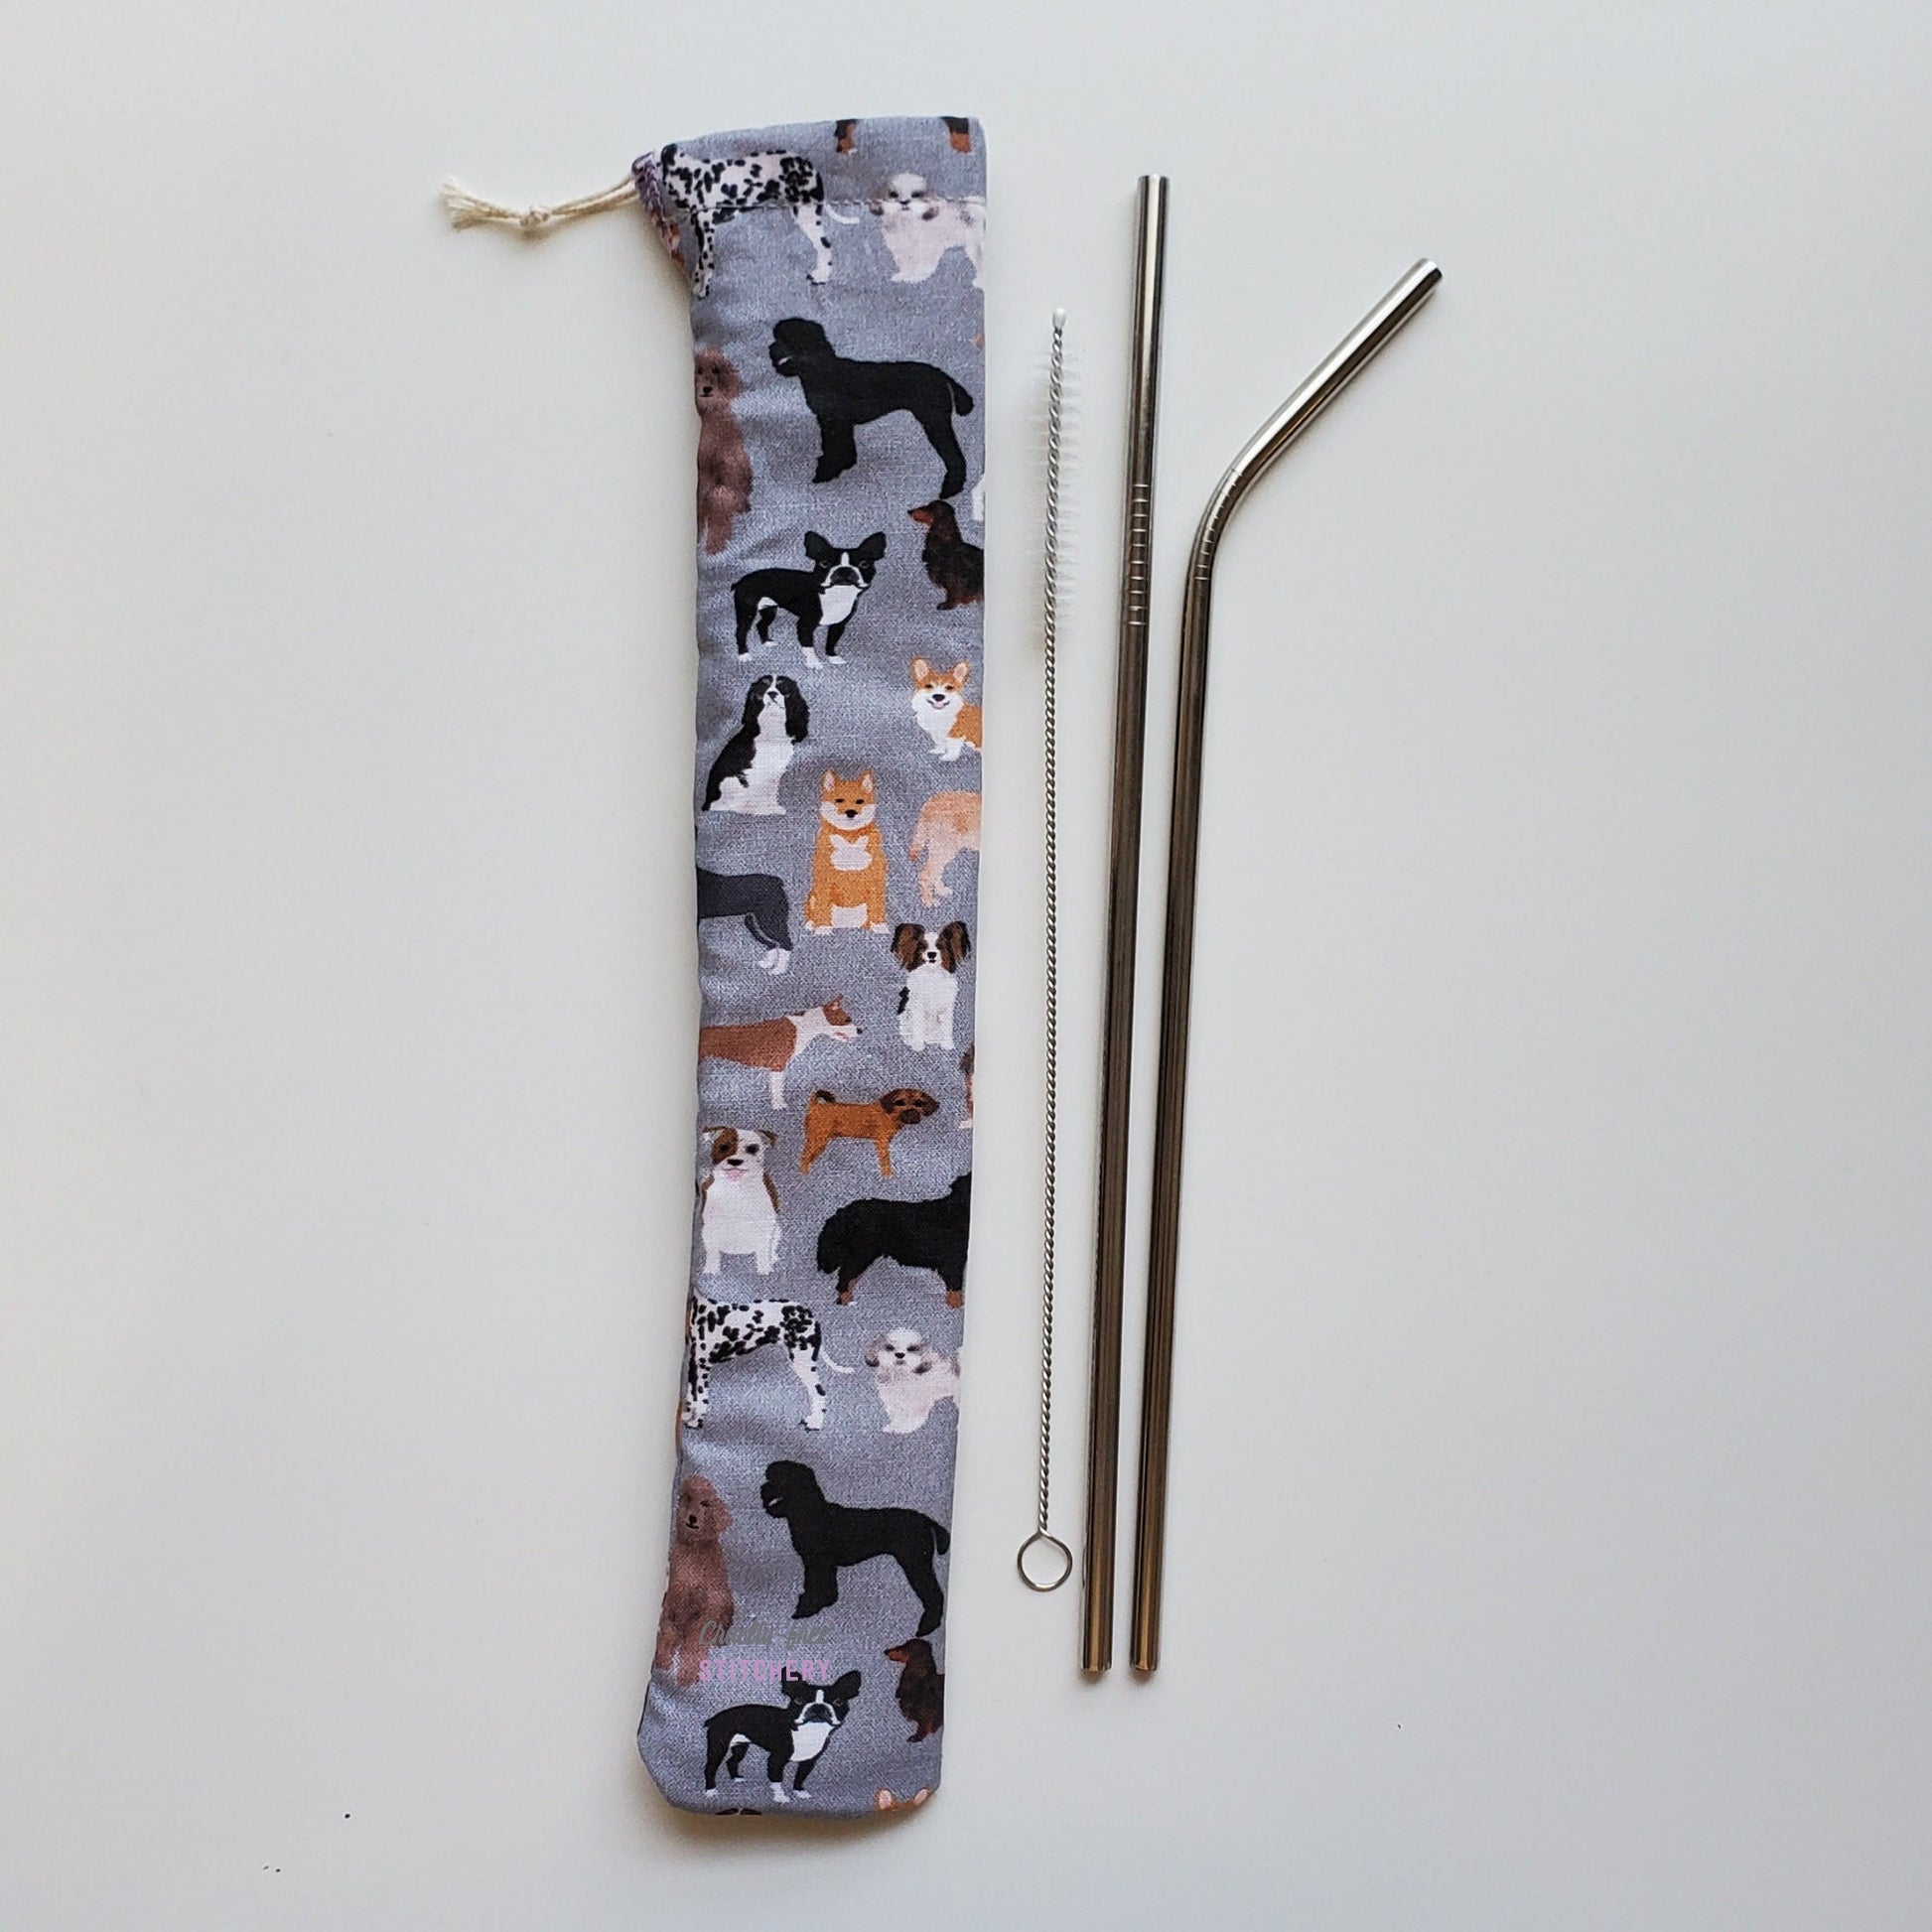 Reusable straw pouch in the same dog print laying vertically next to a straw cleaner brush, a straight stainless steel straw, and a bent stainless steel straw.